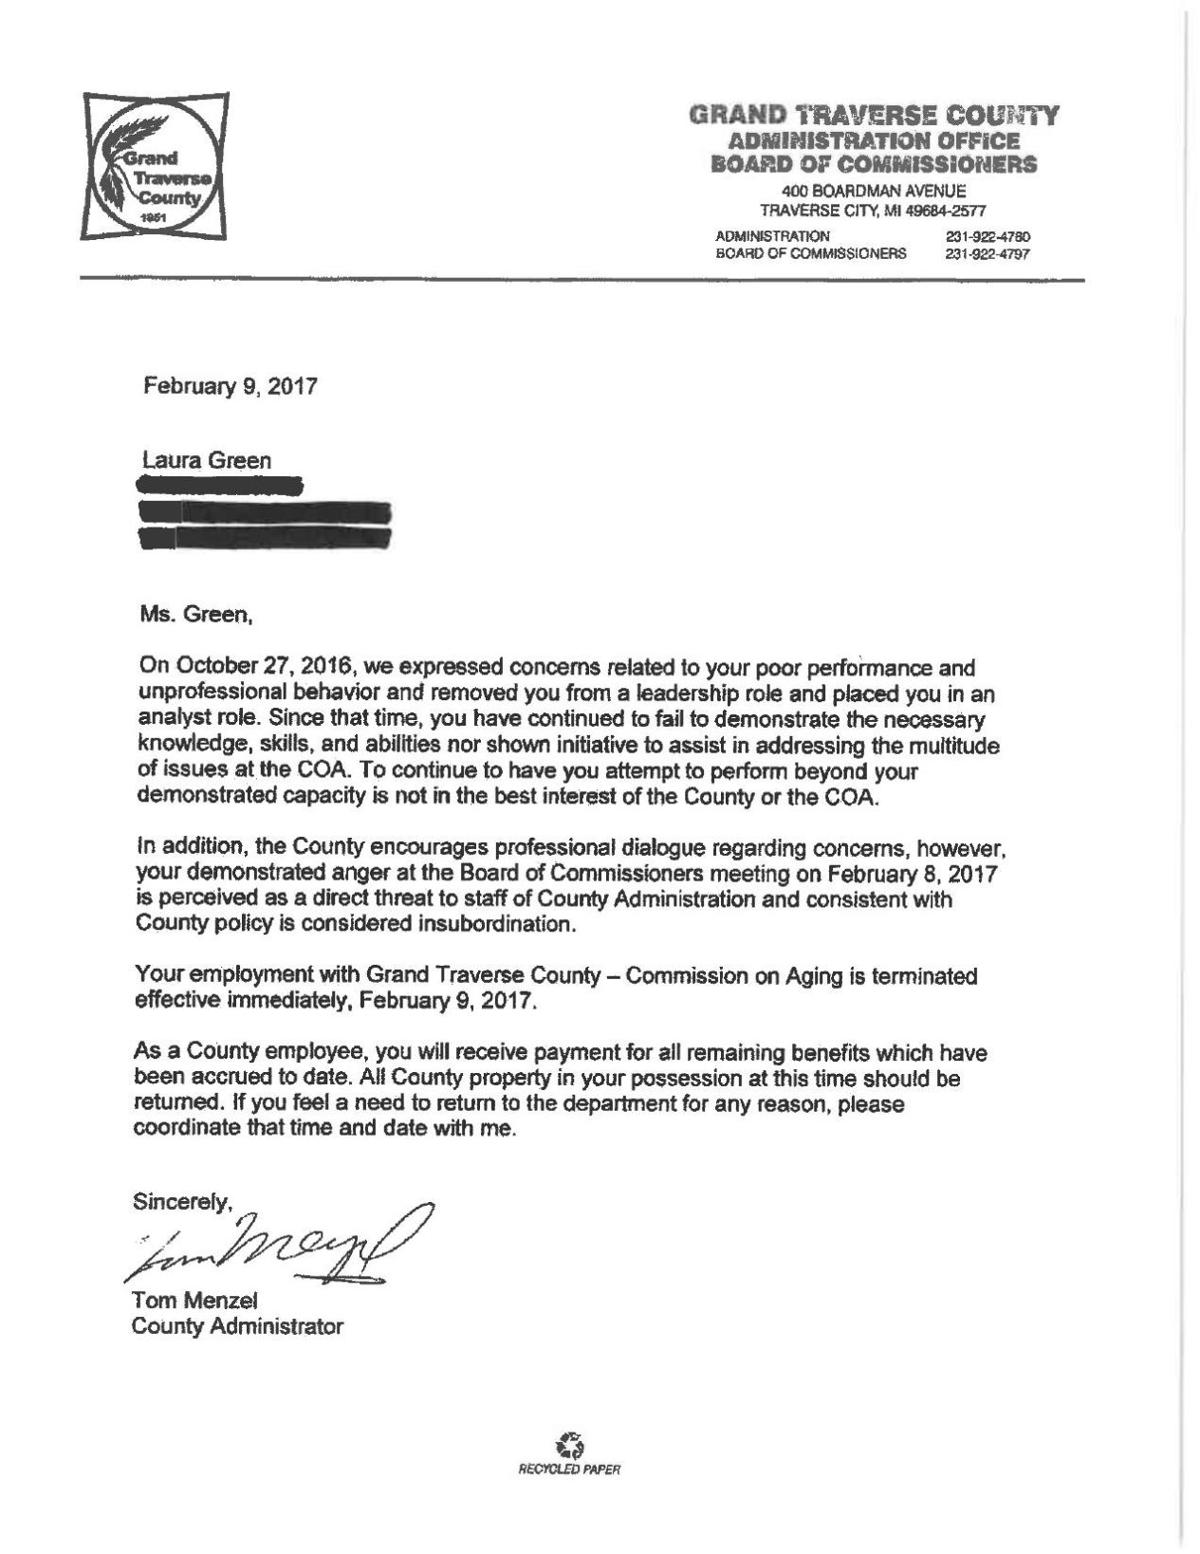 Termination Letter from bloximages.chicago2.vip.townnews.com